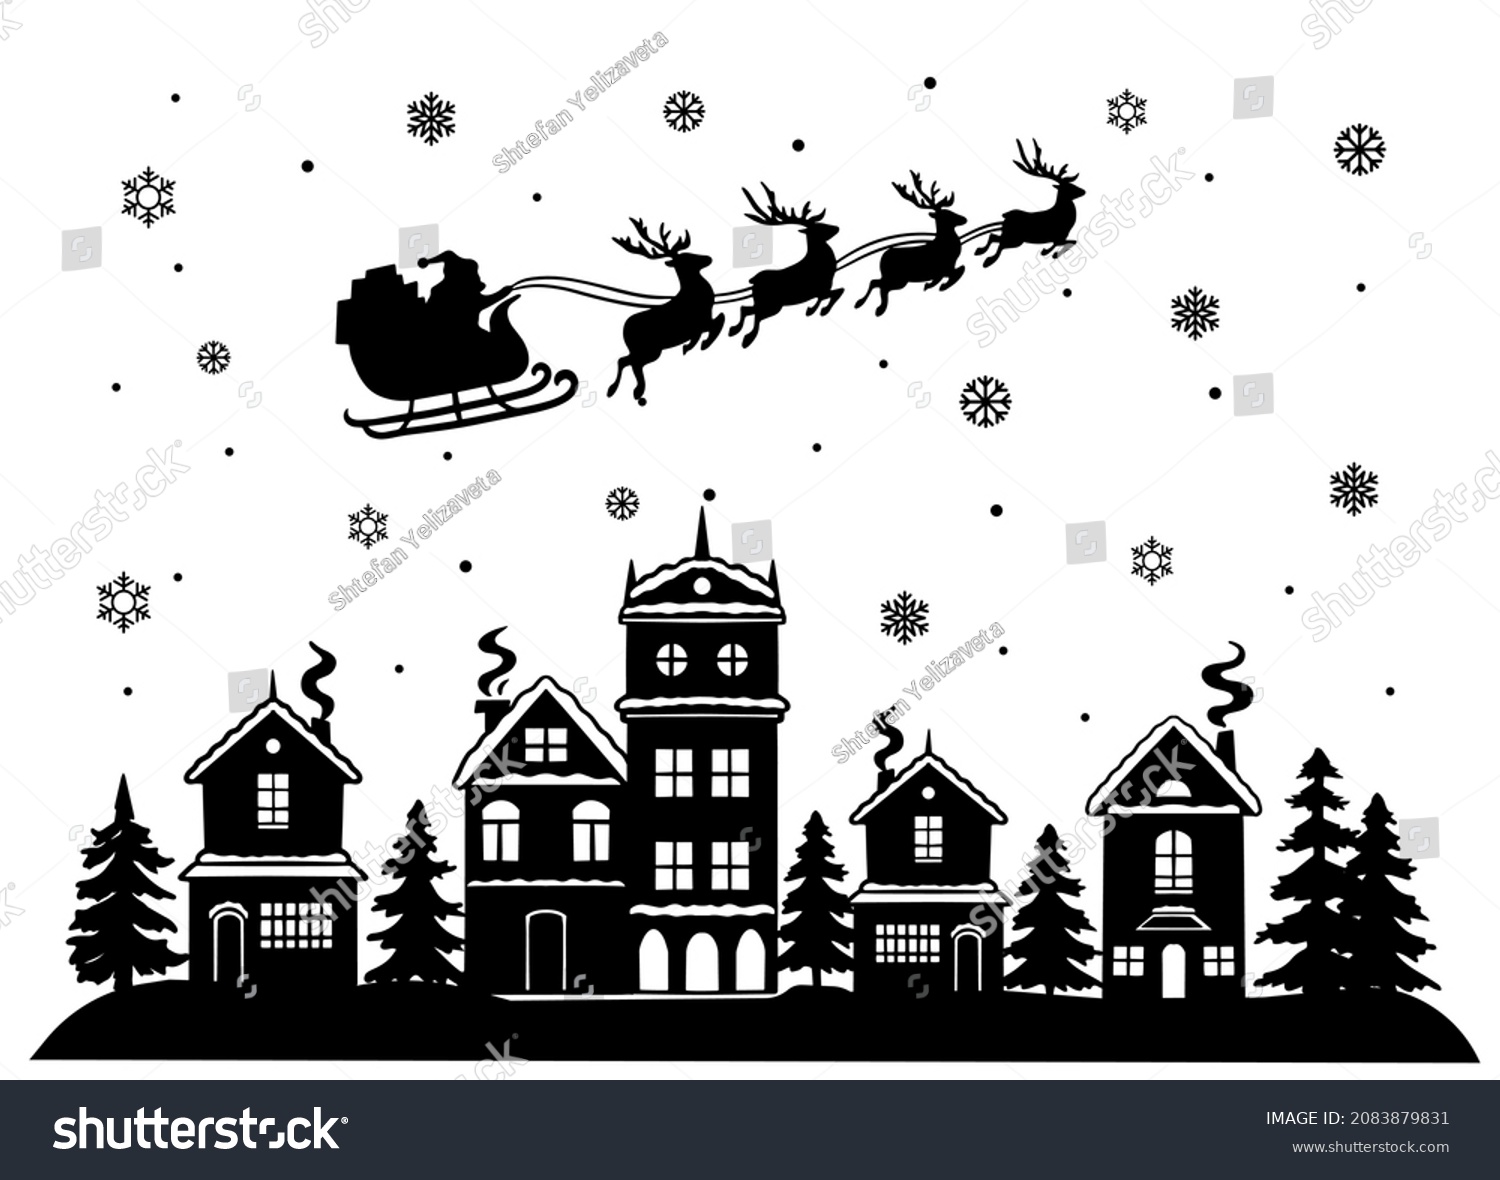 SVG of Christmas scene. Santa Claus flies over houses in a sleigh. Santa's cart with reindeer.Christmas Village vector clipart svg